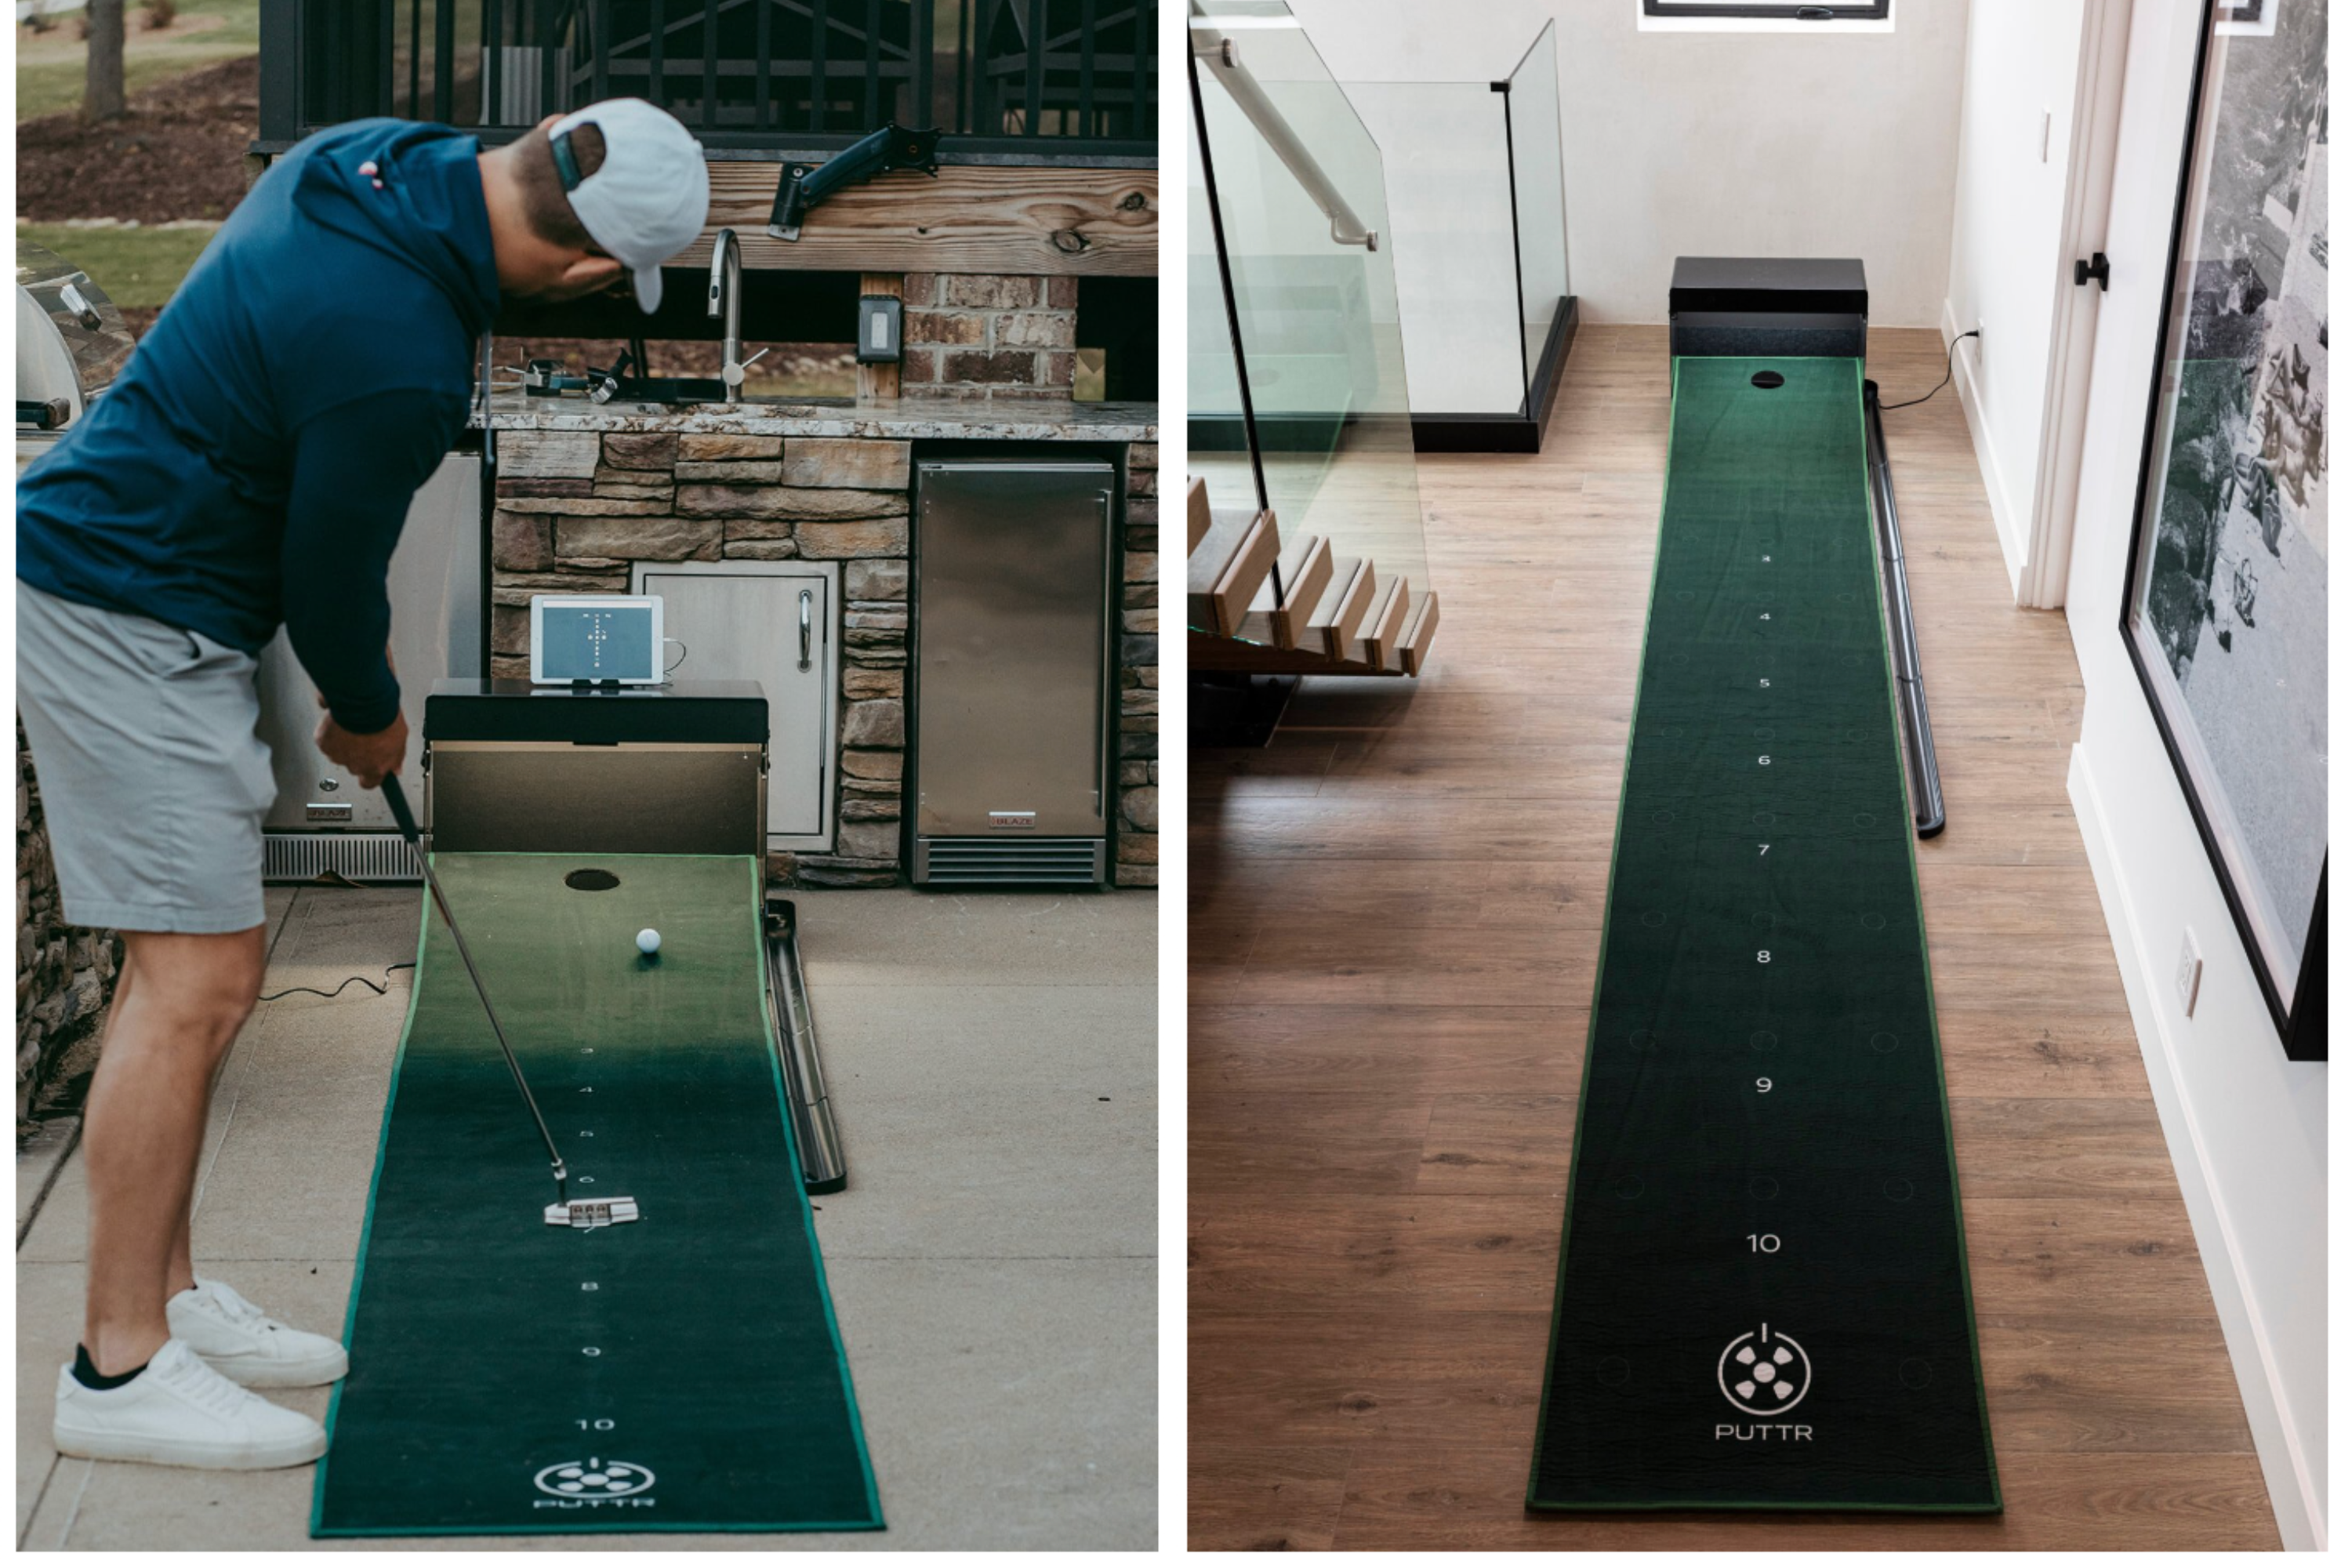 Raspberry Pi-powered putting green leverages awesome tech to make practice fun